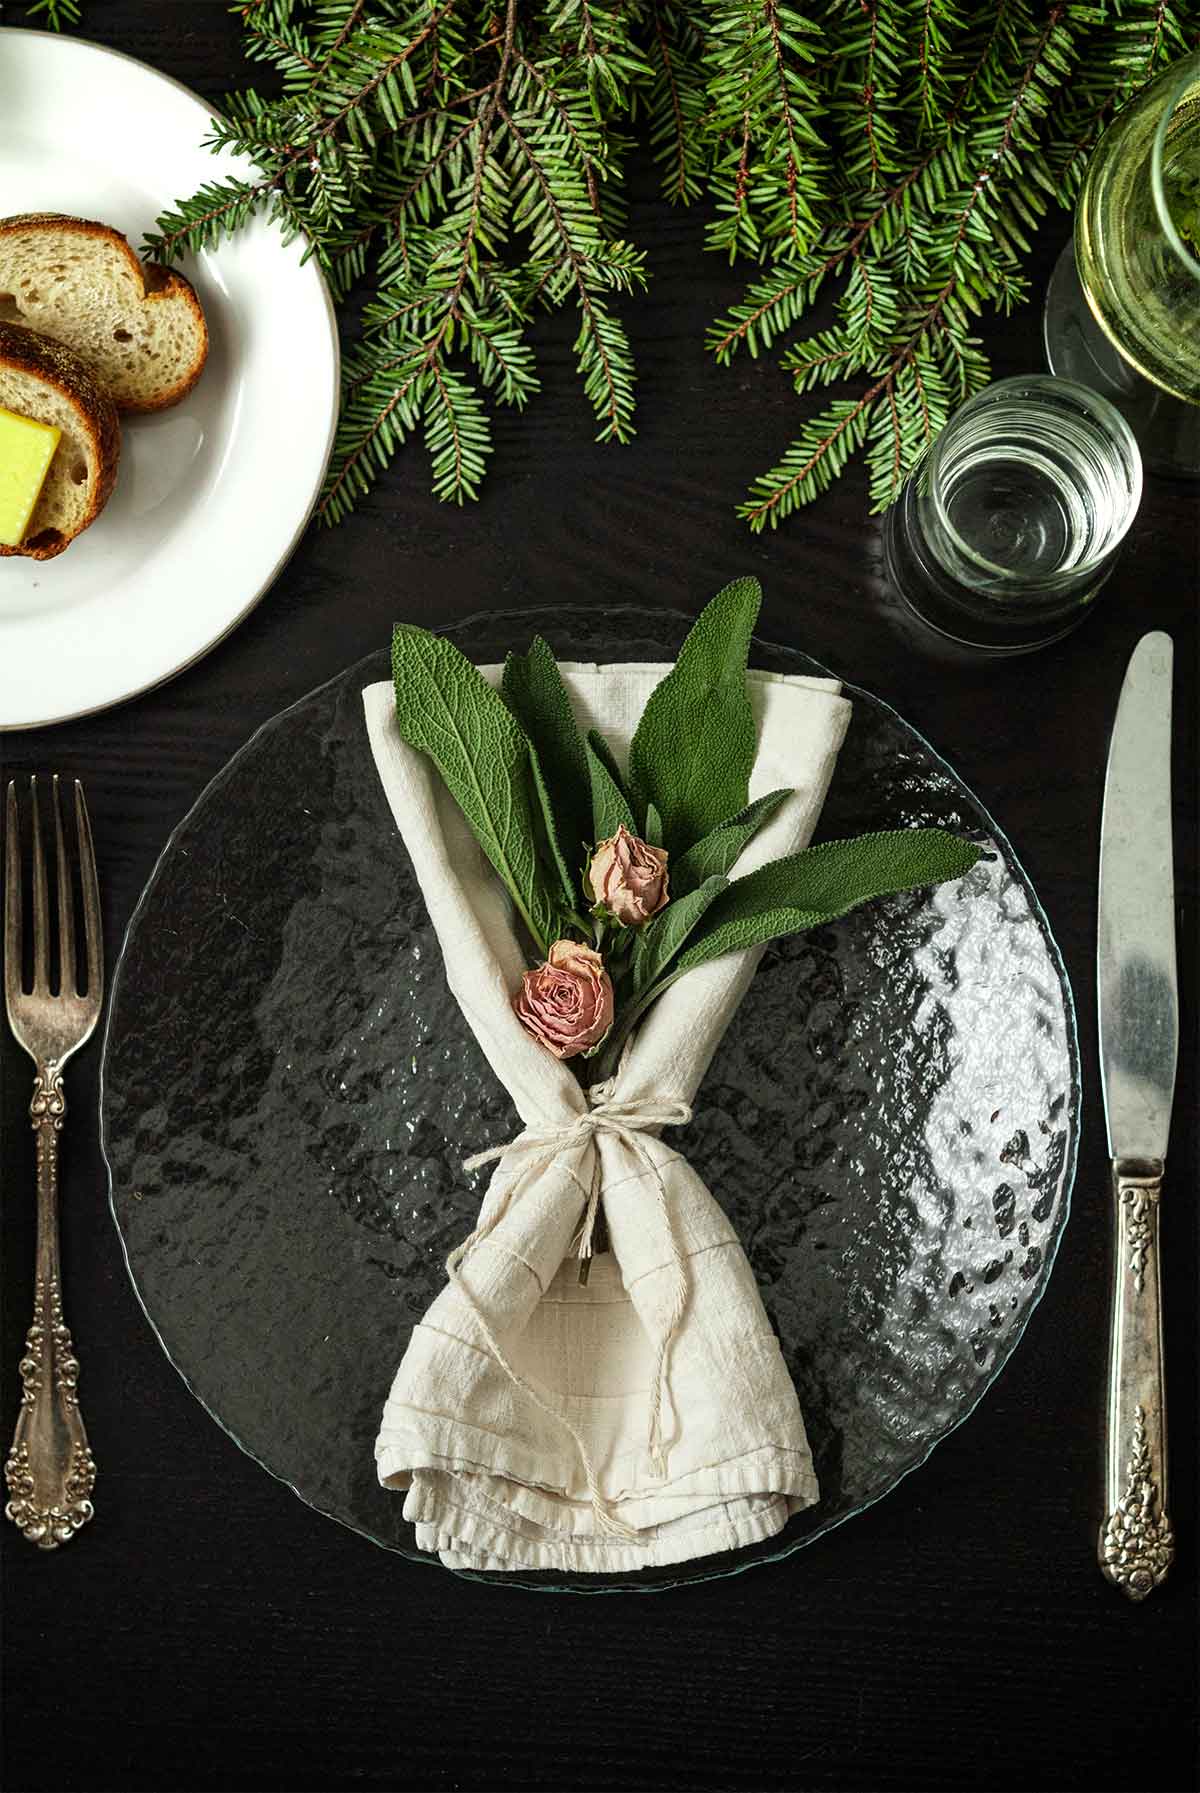 2 roses and sage in a tied napkin on a plate on a table with holiday greenery, a plate of bread, silverware and glassware.